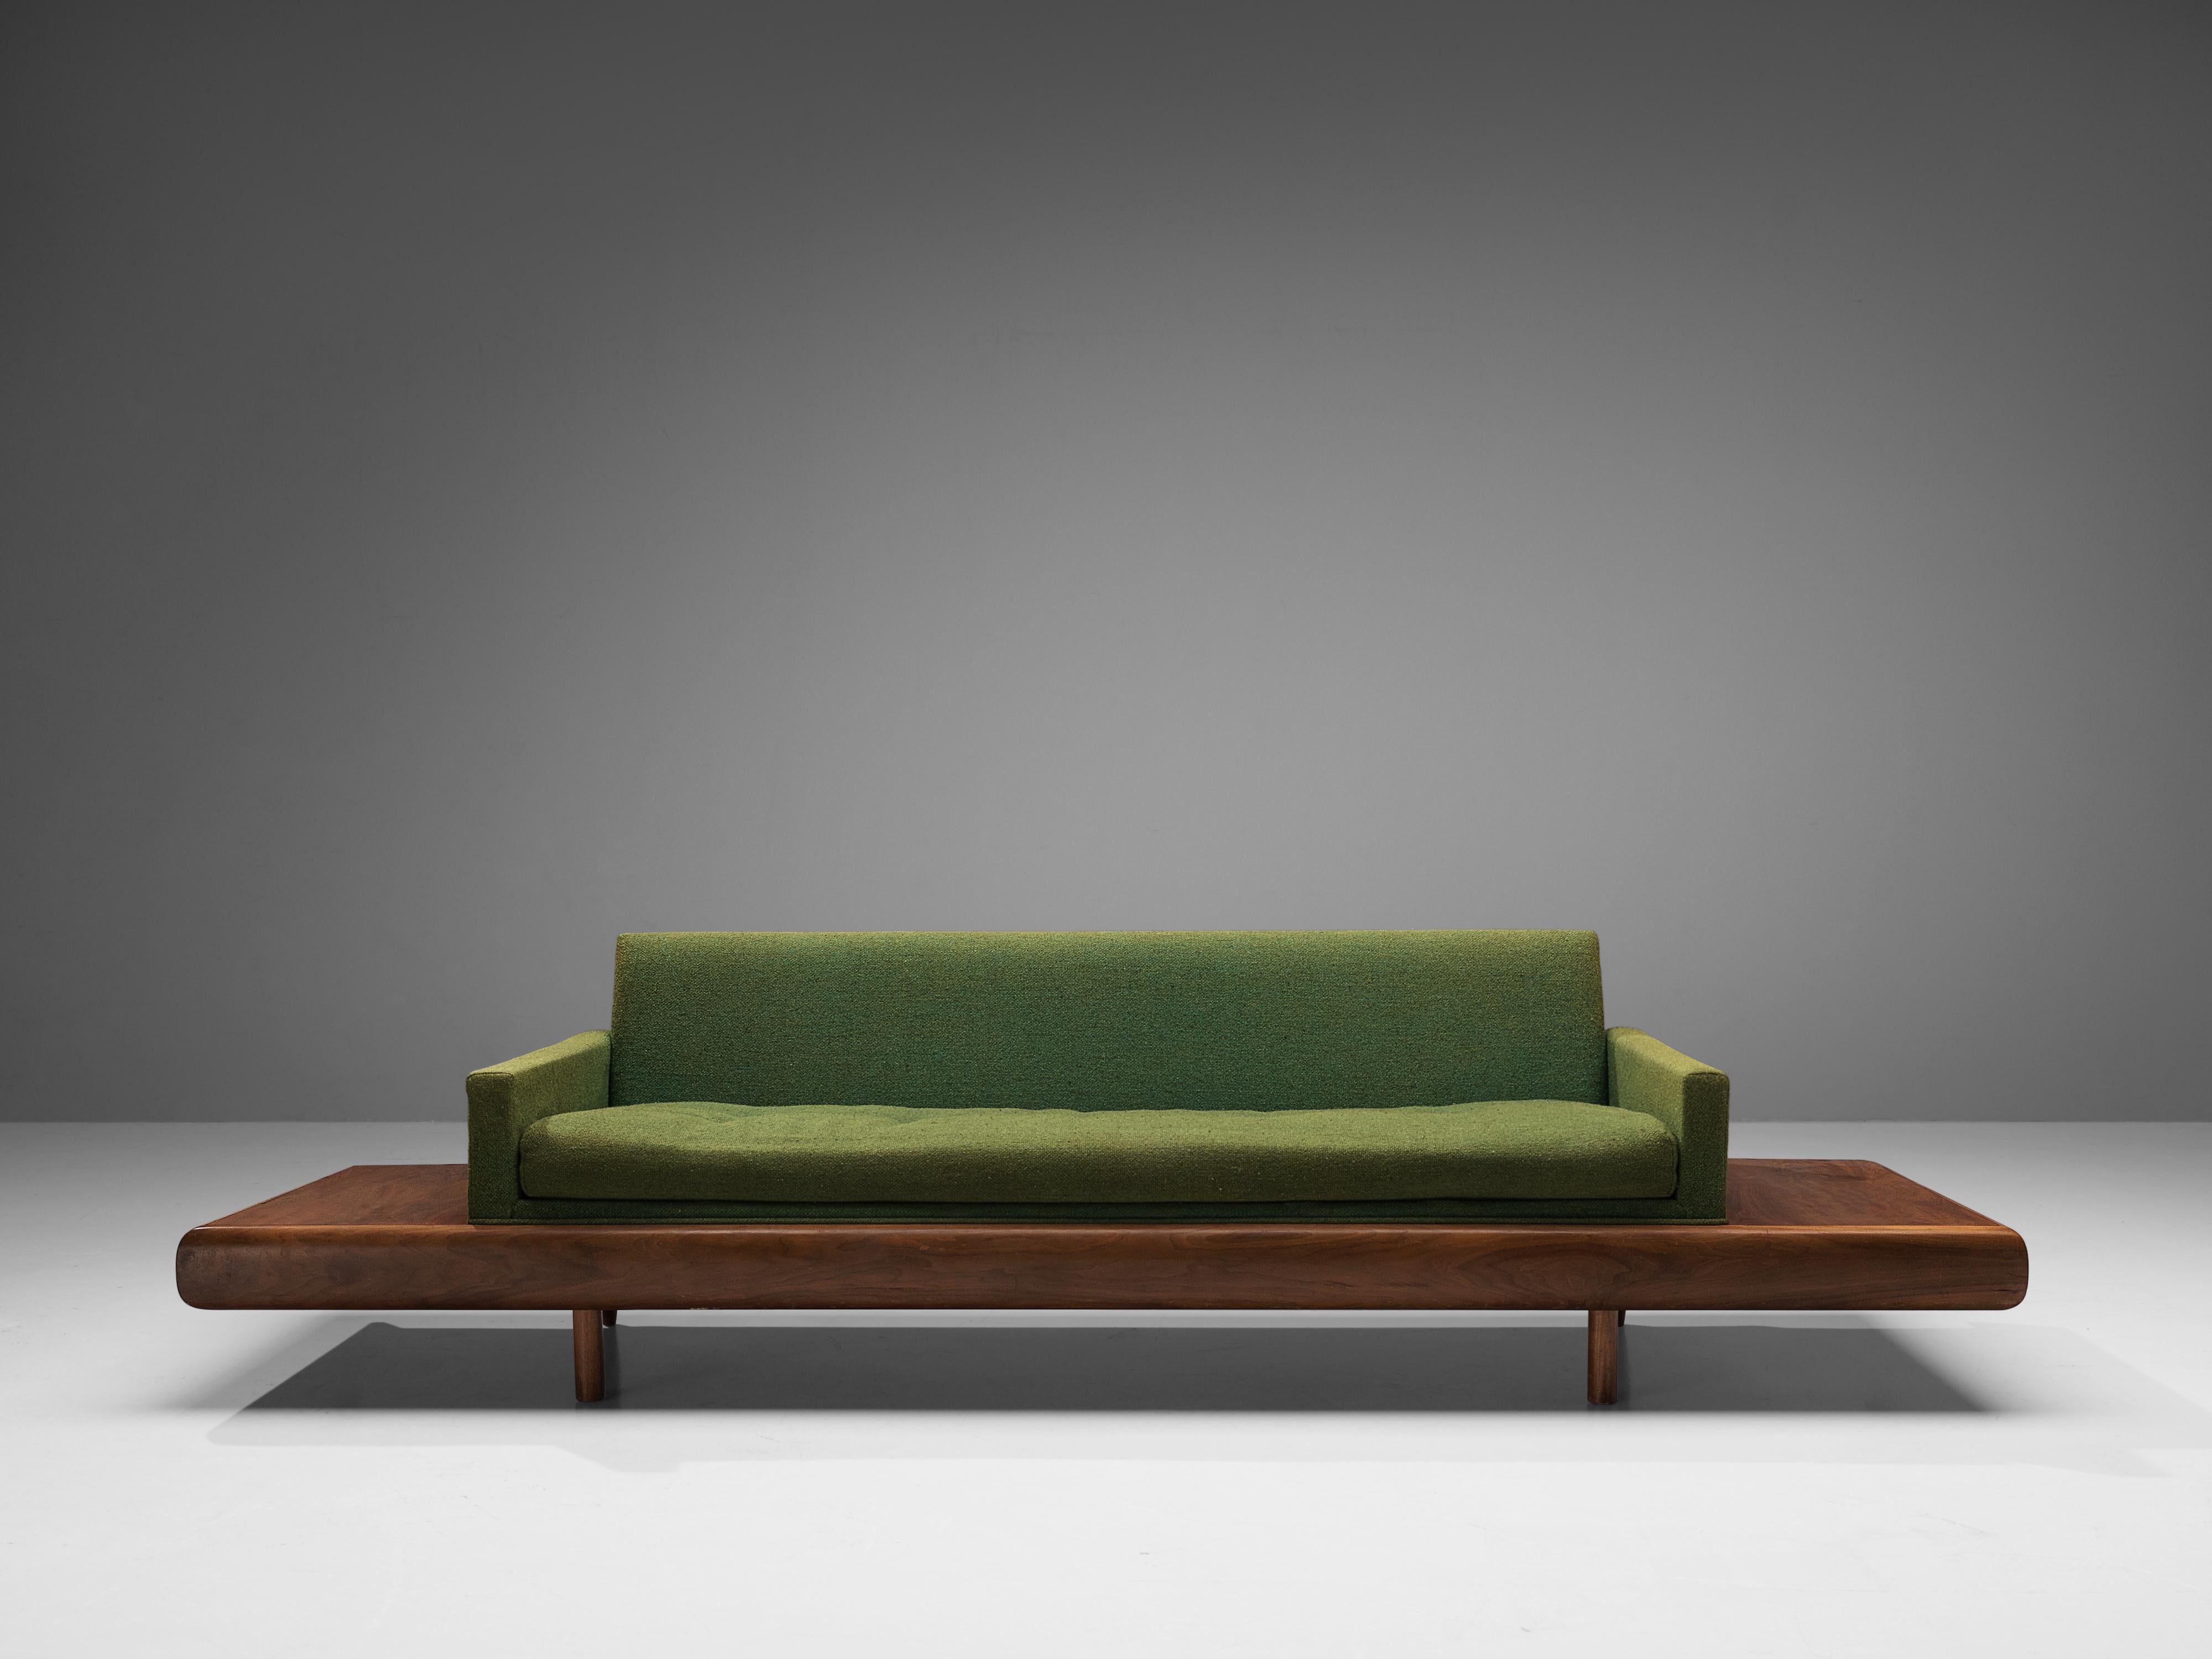 Adrian Pearsall, 'Platform' sofa, fabric, walnut, United States, 1960s

Adrian Pearsall is known for his rather unique sofa designs. This one is no exception. On a low base of a thick walnut frame rests the sofa, which continues, resulting in side